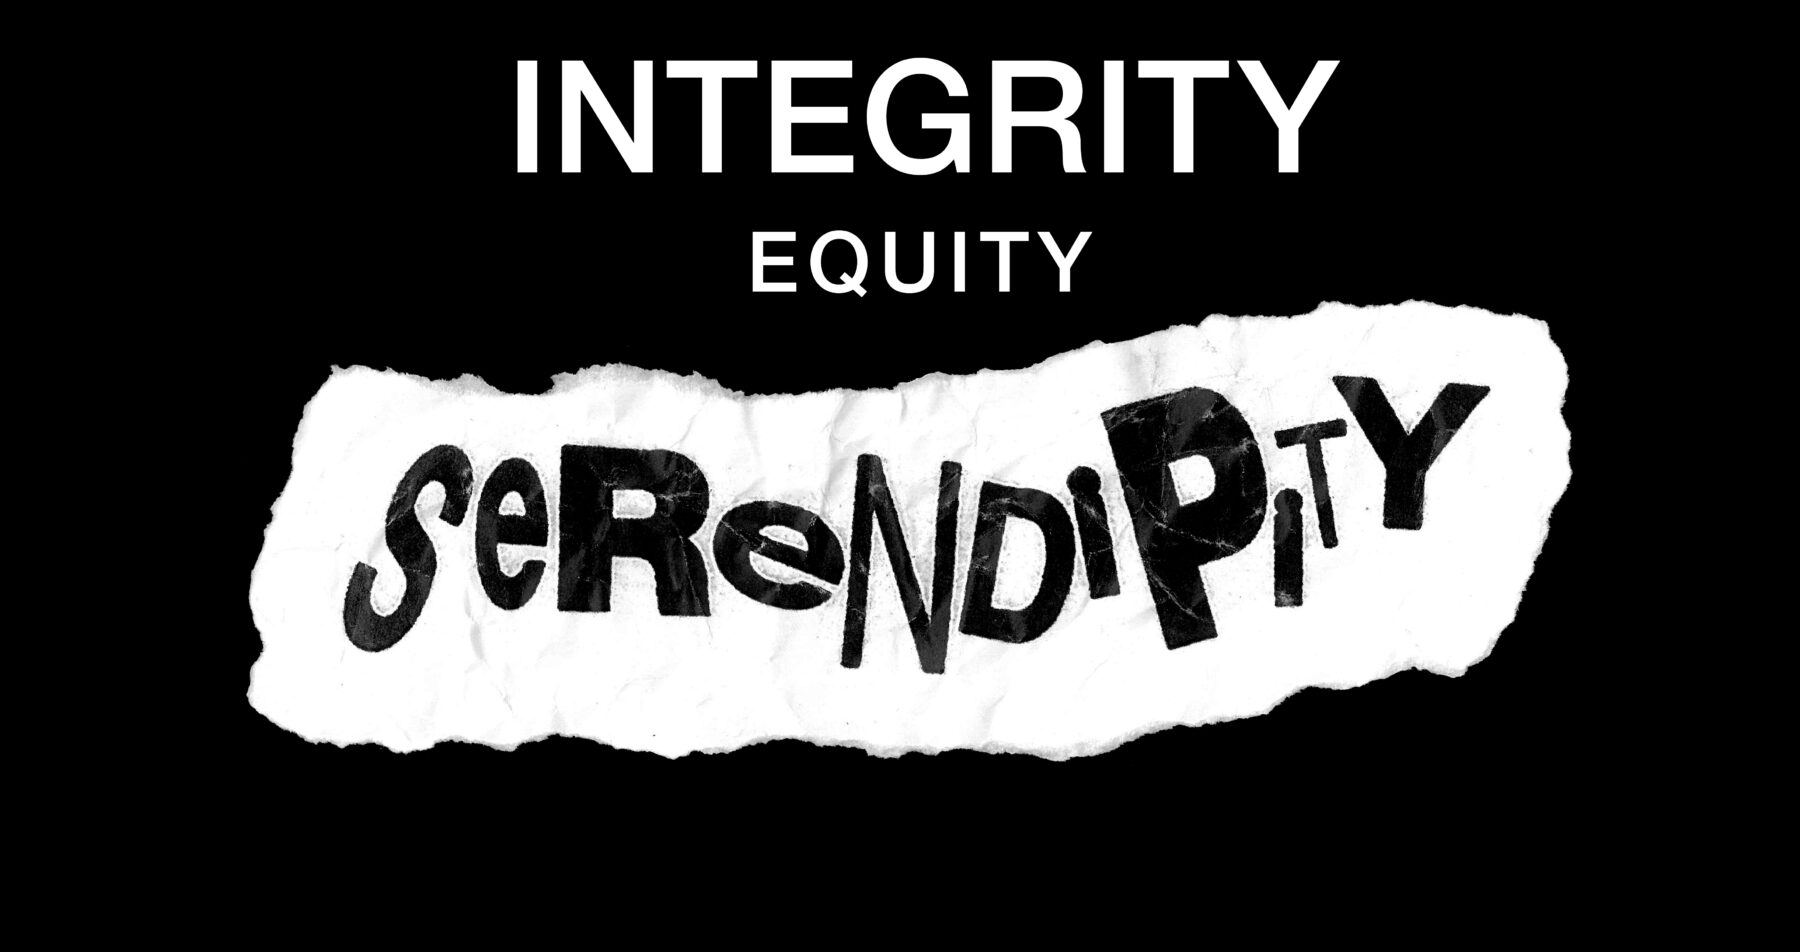 Integrity, equity and serendipity